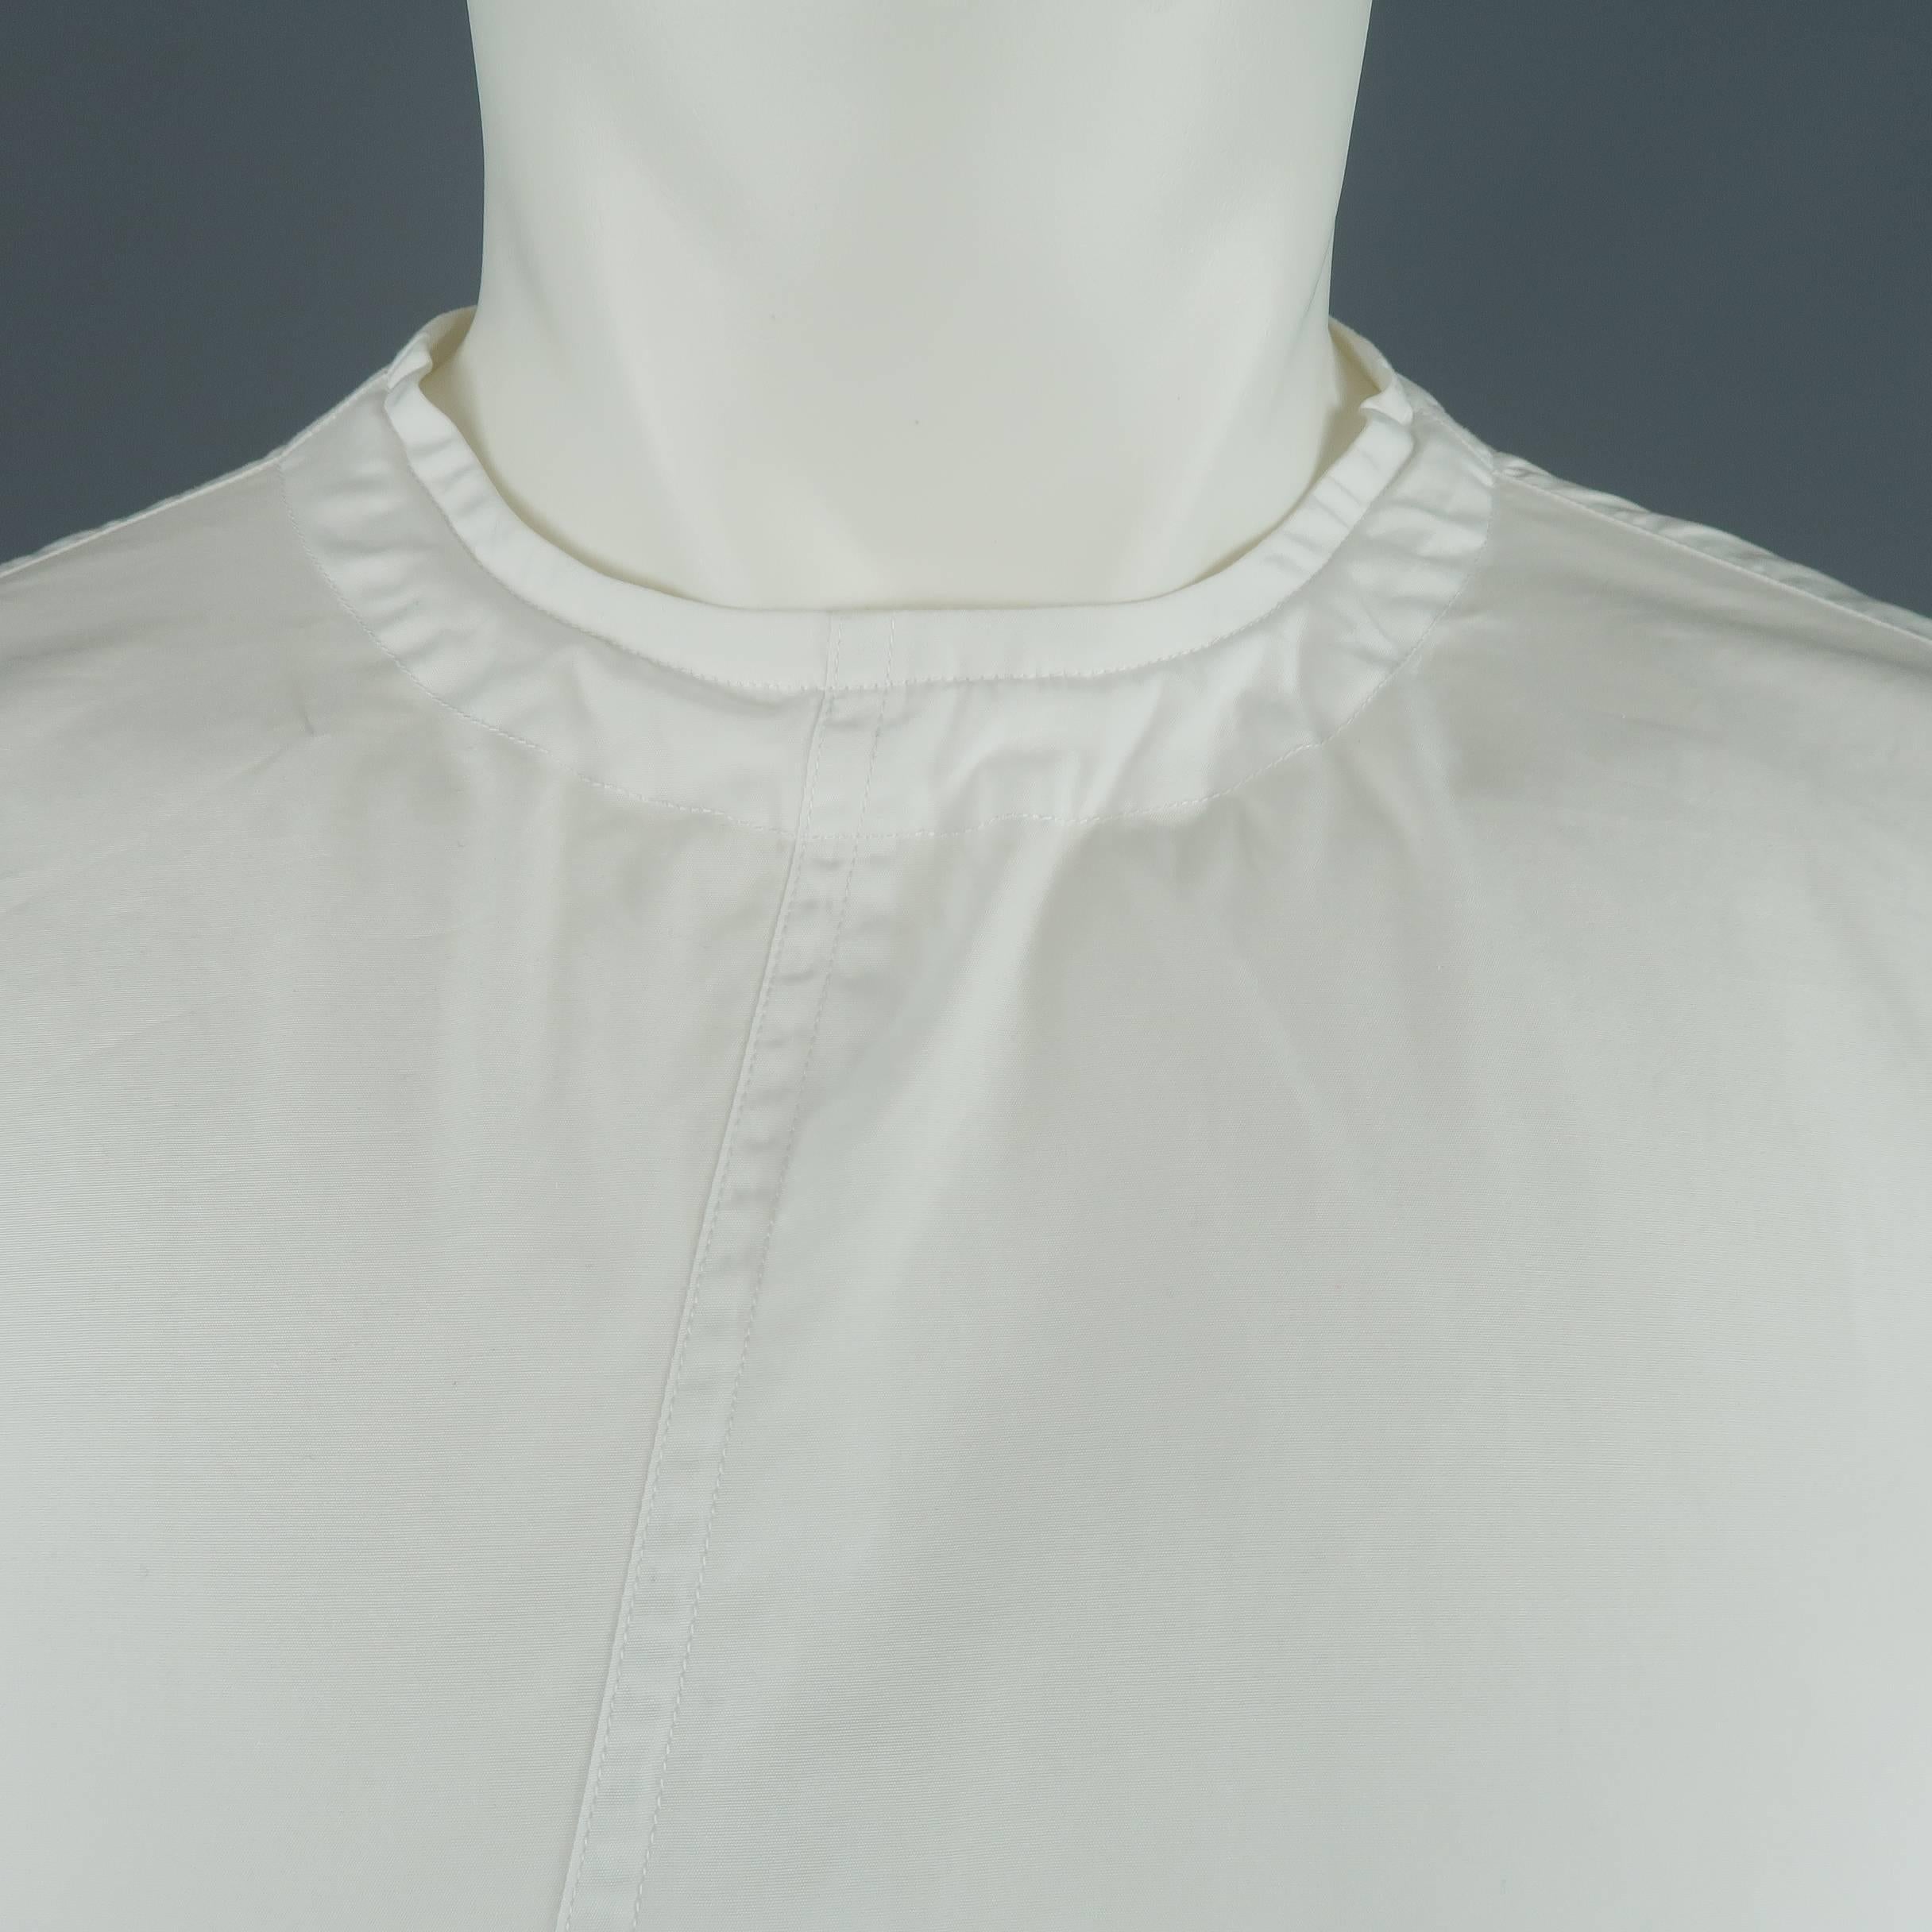 MARNI oversized tunic shirt comes in white cotton with a round neck asymmetrical frontal seam, raw hem, and back button up closure with tie. Made in Italy.
 
New with Tags.
Marked: IT 48
 
Measurements:
 
Shoulder: 21 in.
Chest: 50 in.
Sleeve: 24